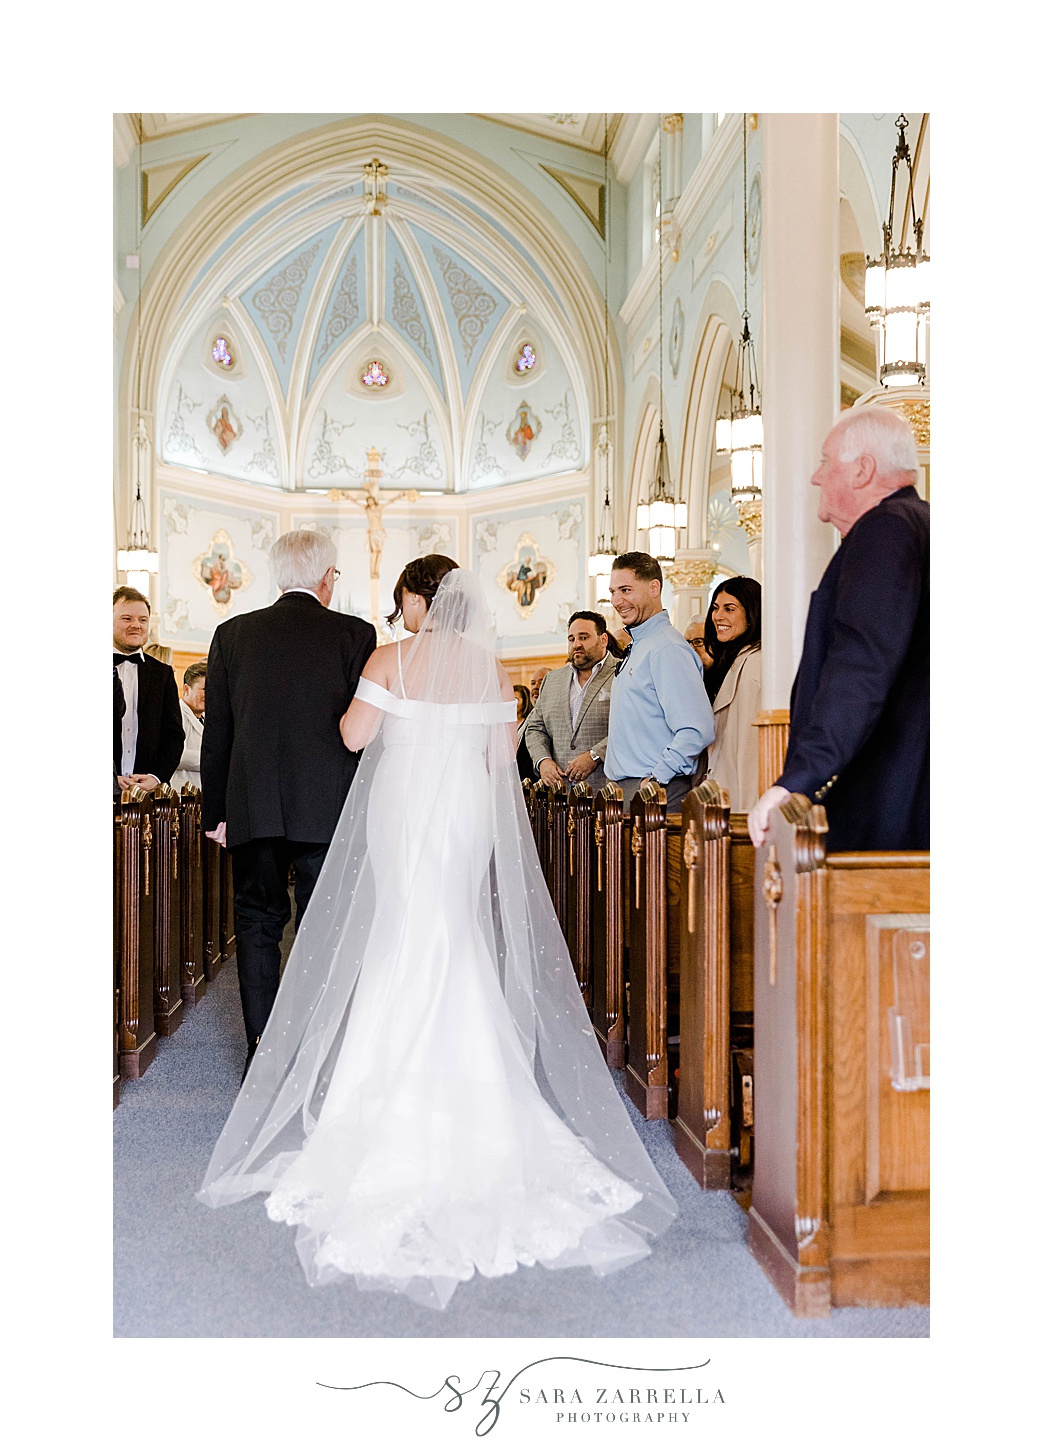 bride walks down aisle with veil trailing behind her inside Our Lady of the Rosary